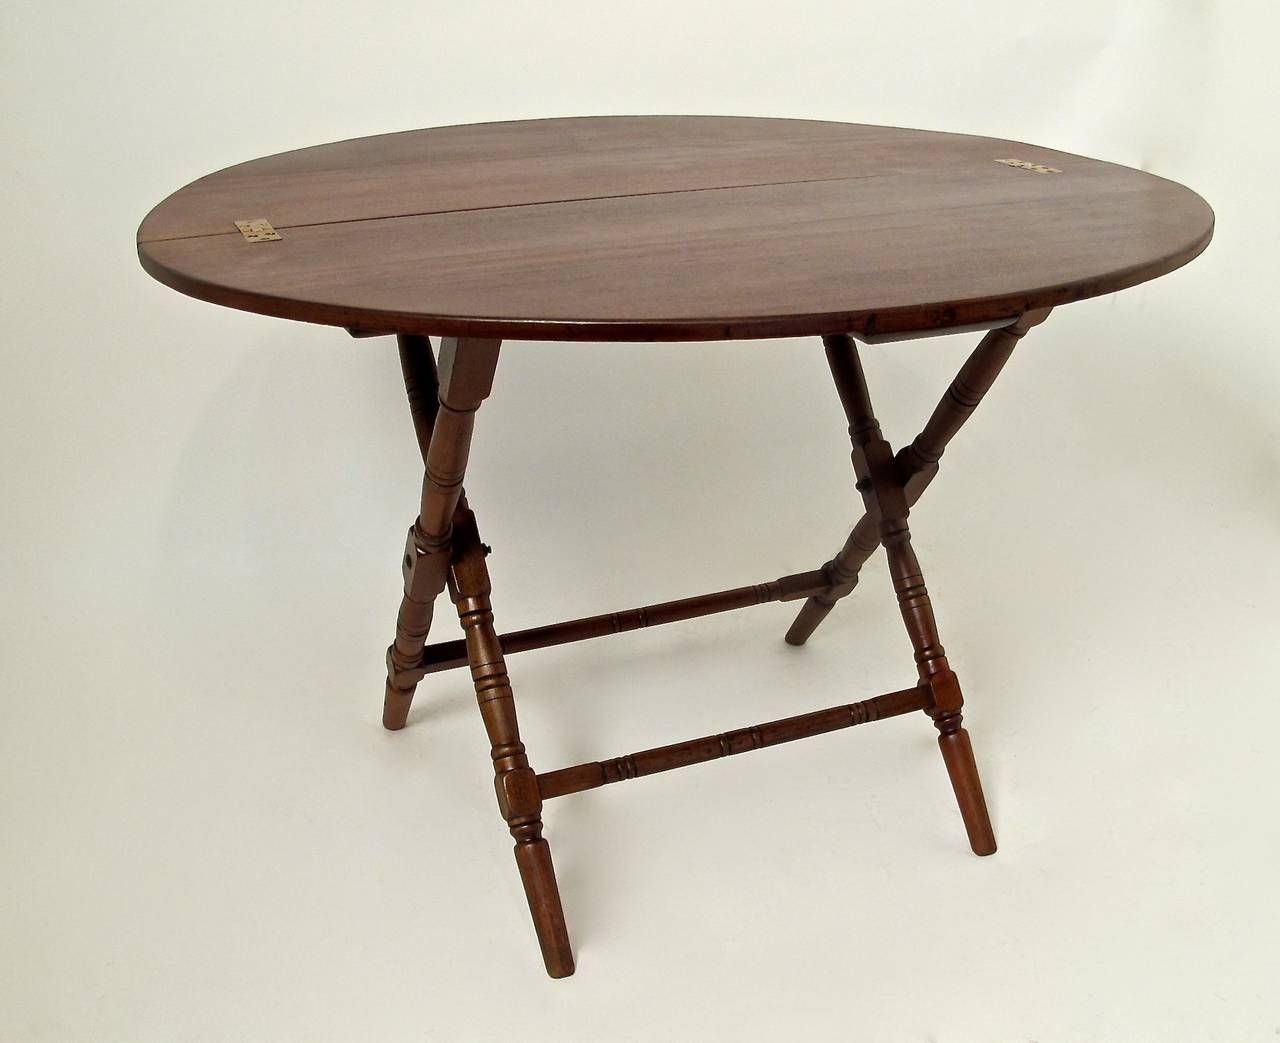 Campaign style walnut oval shaped folding table. 
Late 19th century, England.